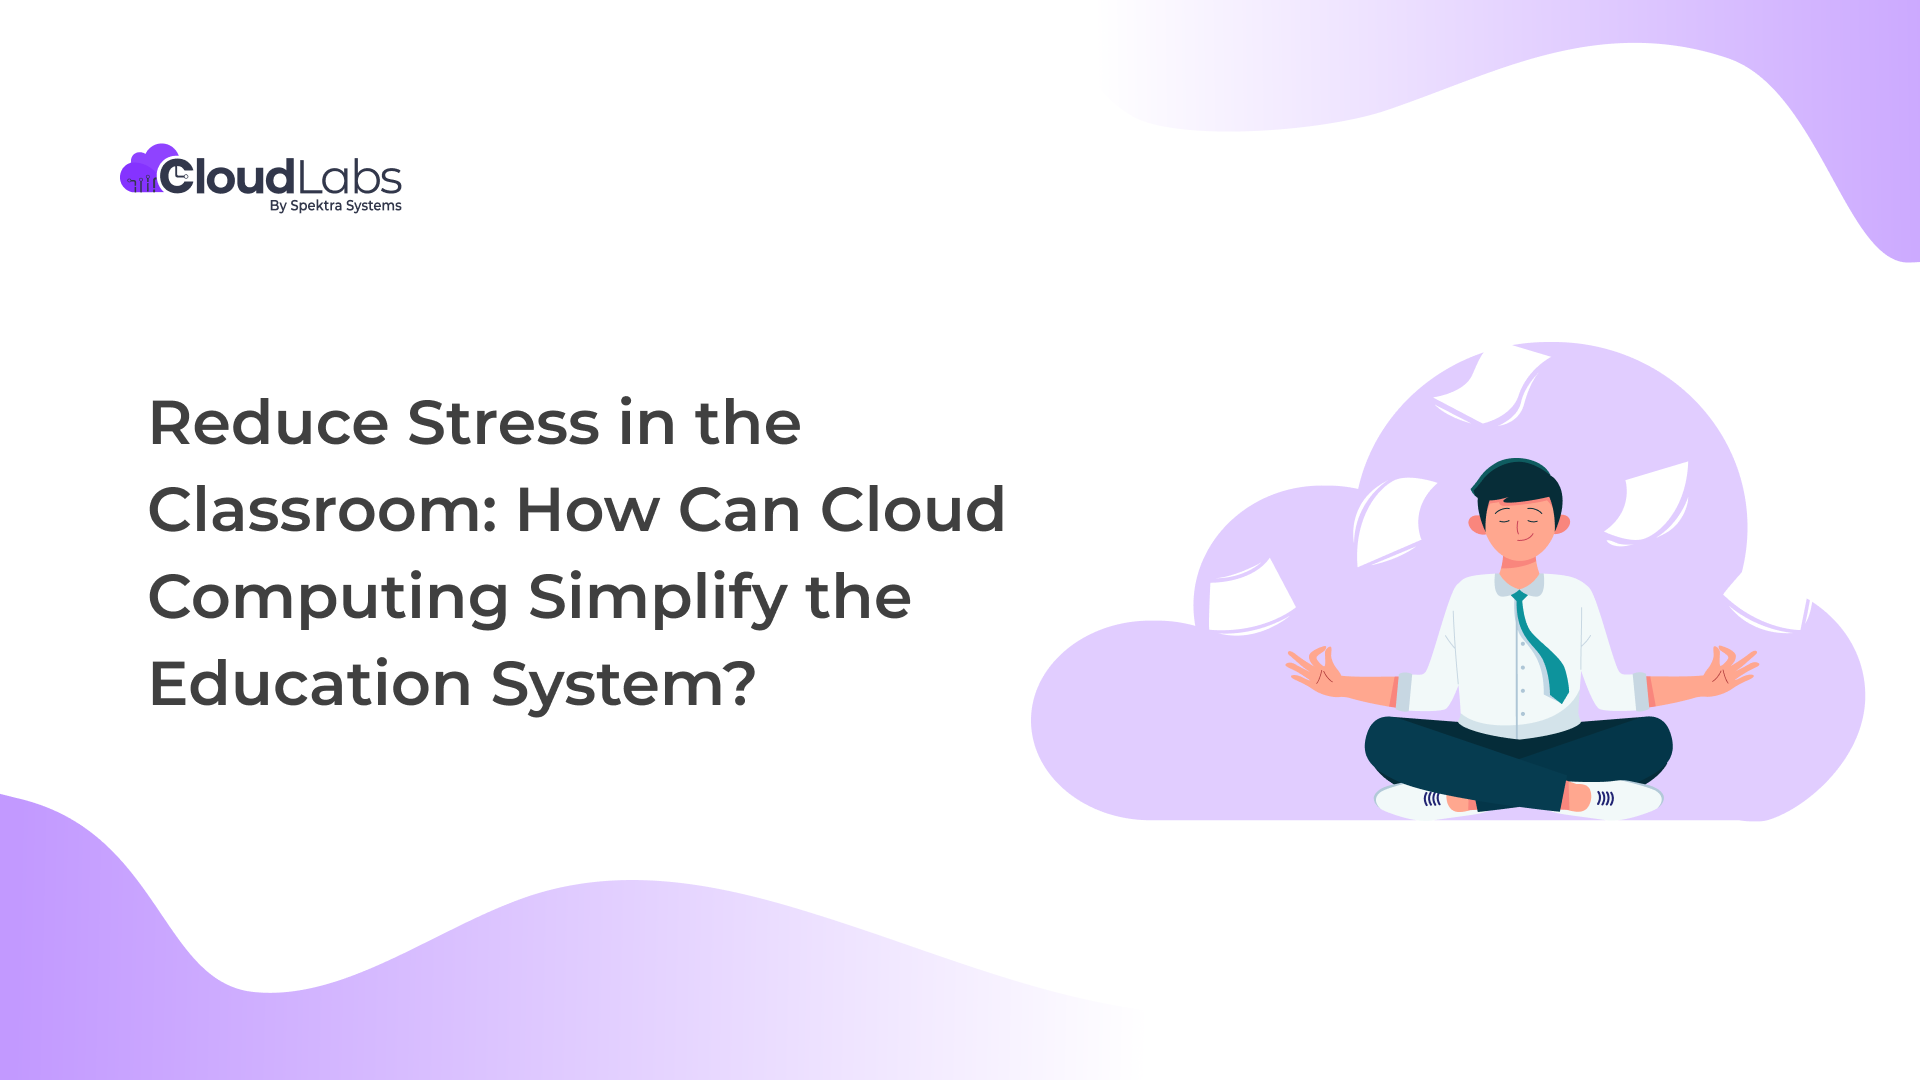 Reduce Stress in the Classroom: How Can Cloud Computing Simplify the Education System?